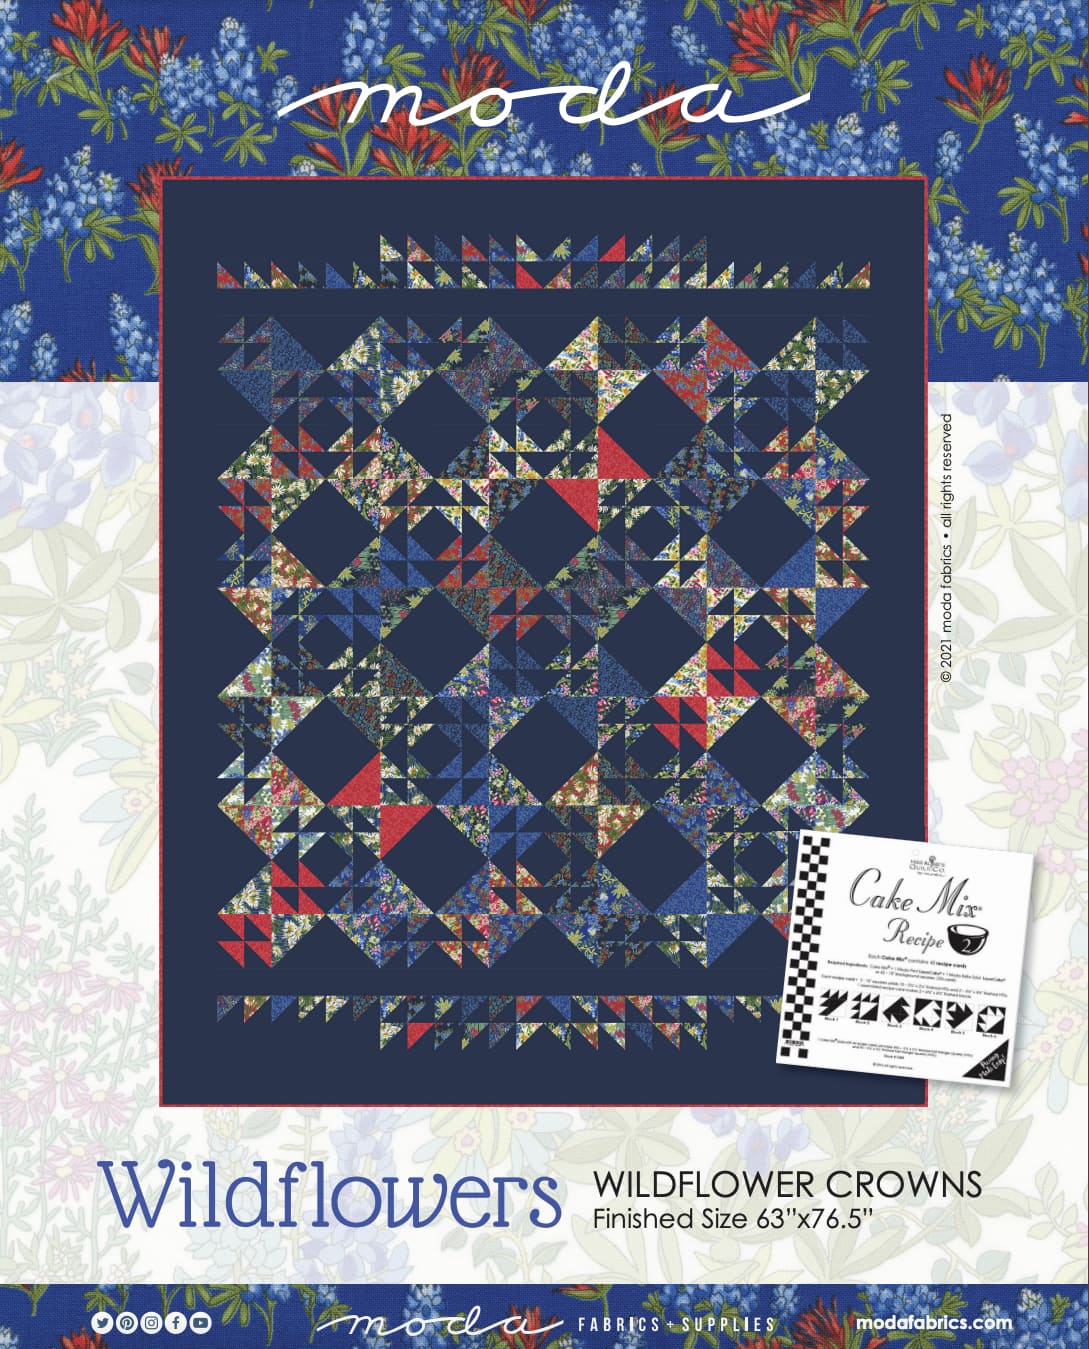 moda wildflowers layer cake quilt pattern free to download and uses one layer cake and cake mix recipe 2. Such a beautiful design with really helpful step by step instructions and images to help you on your way. Quilting made easy - and so much fun!